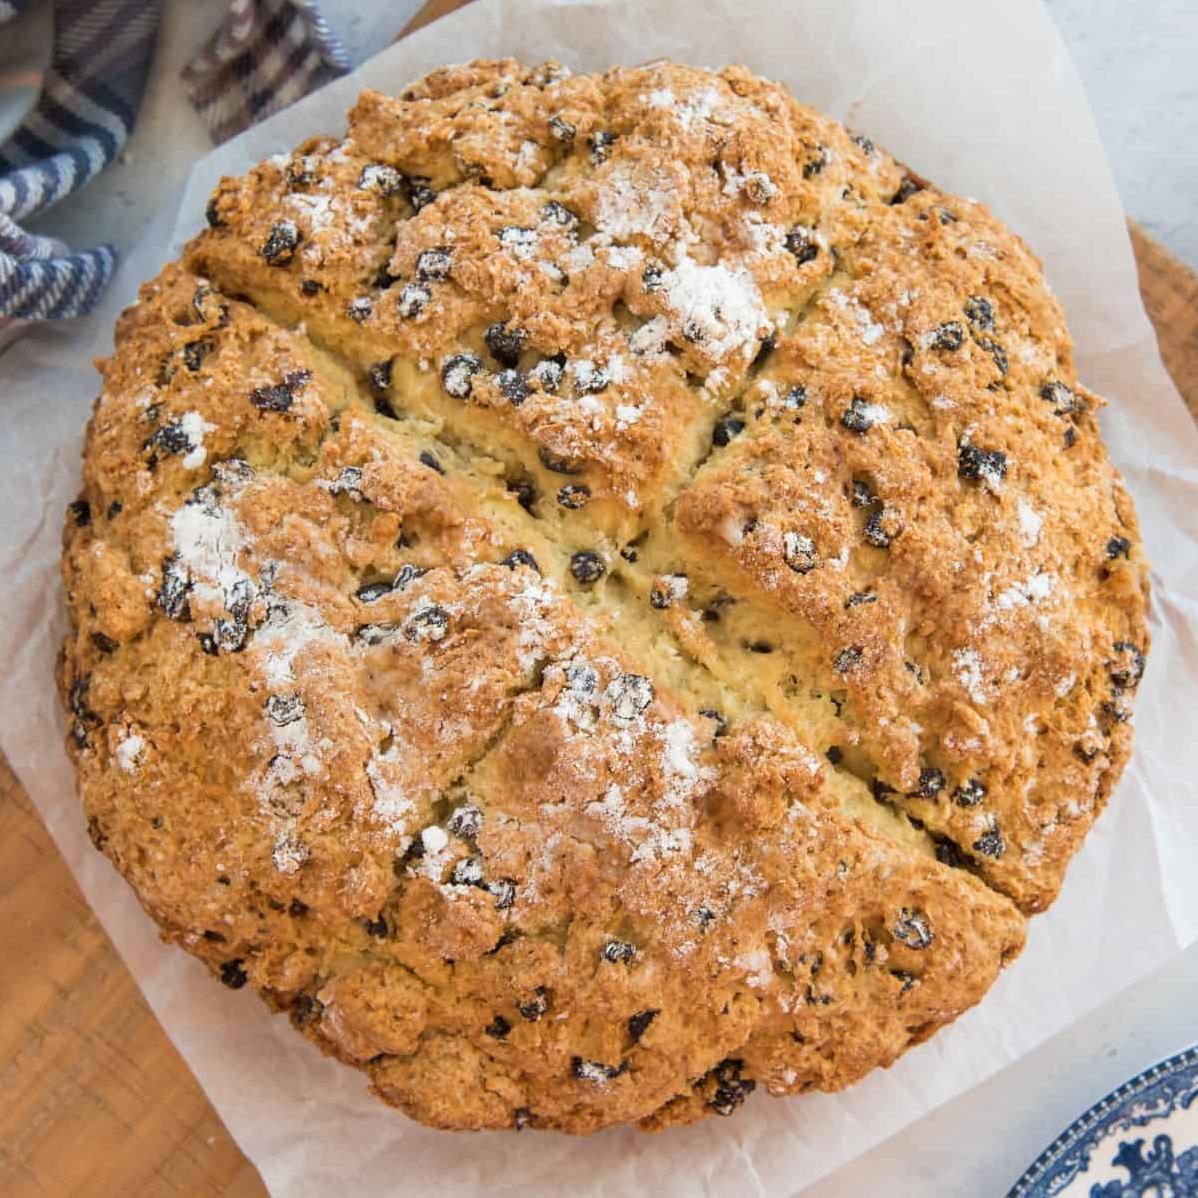  Behold the beautiful golden crust of this freshly-baked Irish Soda Bread.